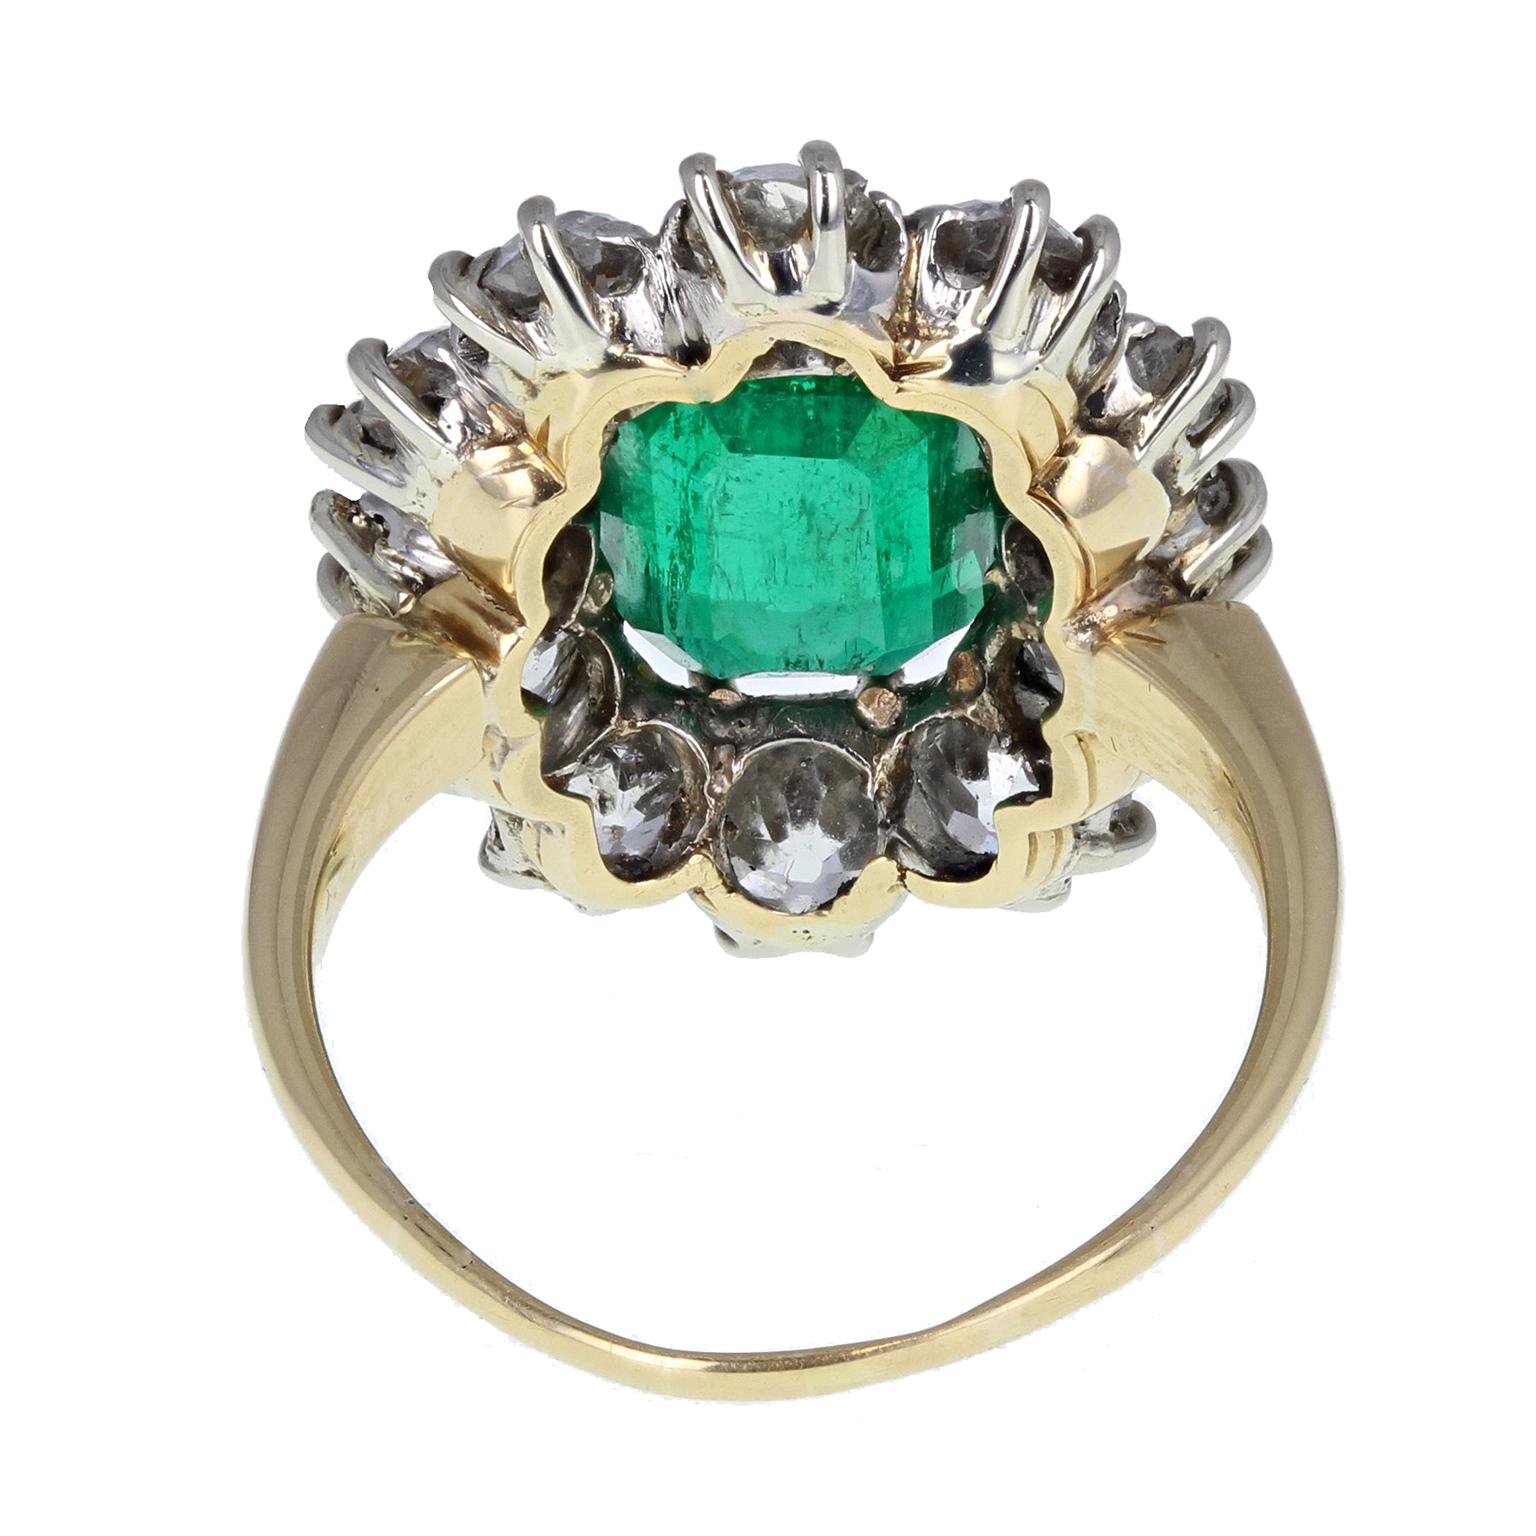 Antique Victorian 18 Carat Gold Emerald Old Cut Diamond Cluster Cocktail Ring In Excellent Condition For Sale In Newcastle Upon Tyne, GB